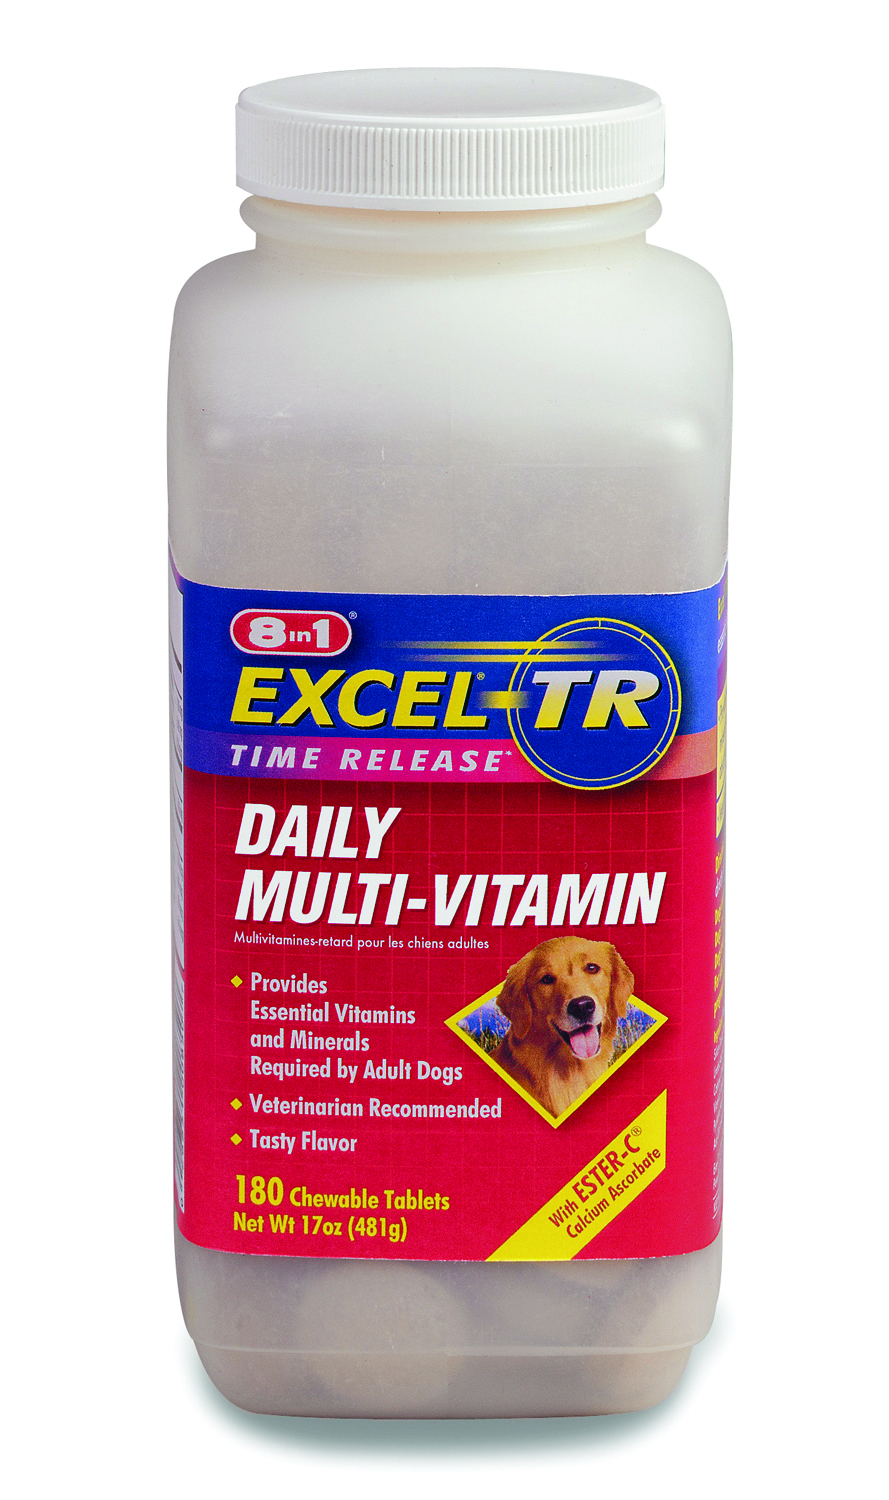 EXCEL-TR DAILY MULTI-VITAMIN CHEWABLES FOR DOGS